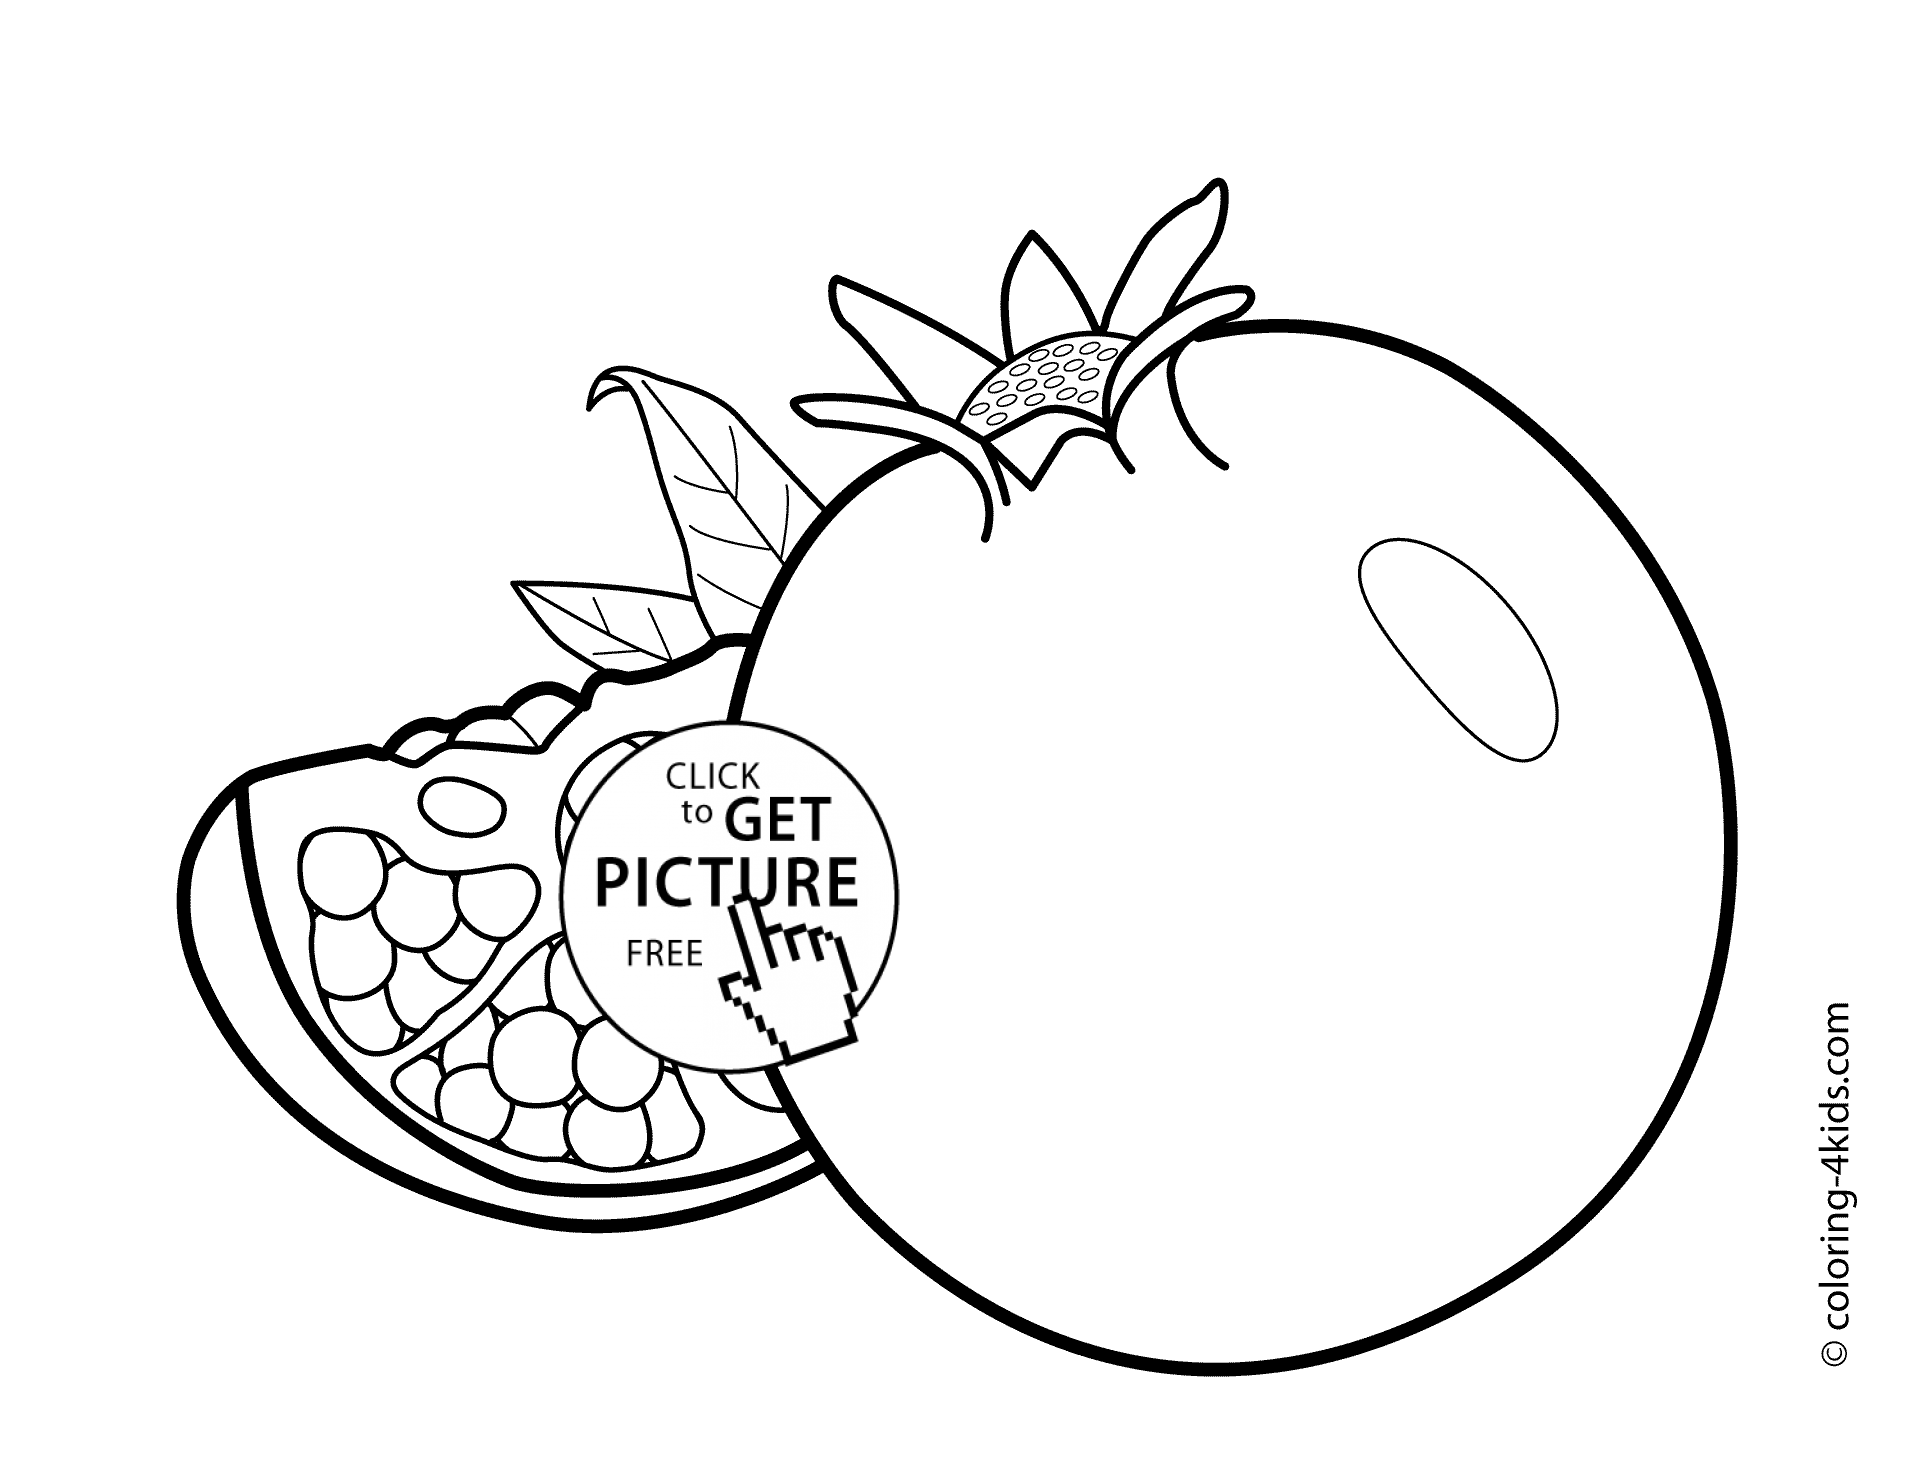 Pomegranate fruits coloring pages for kids, printable free |  coloing-4kids.com